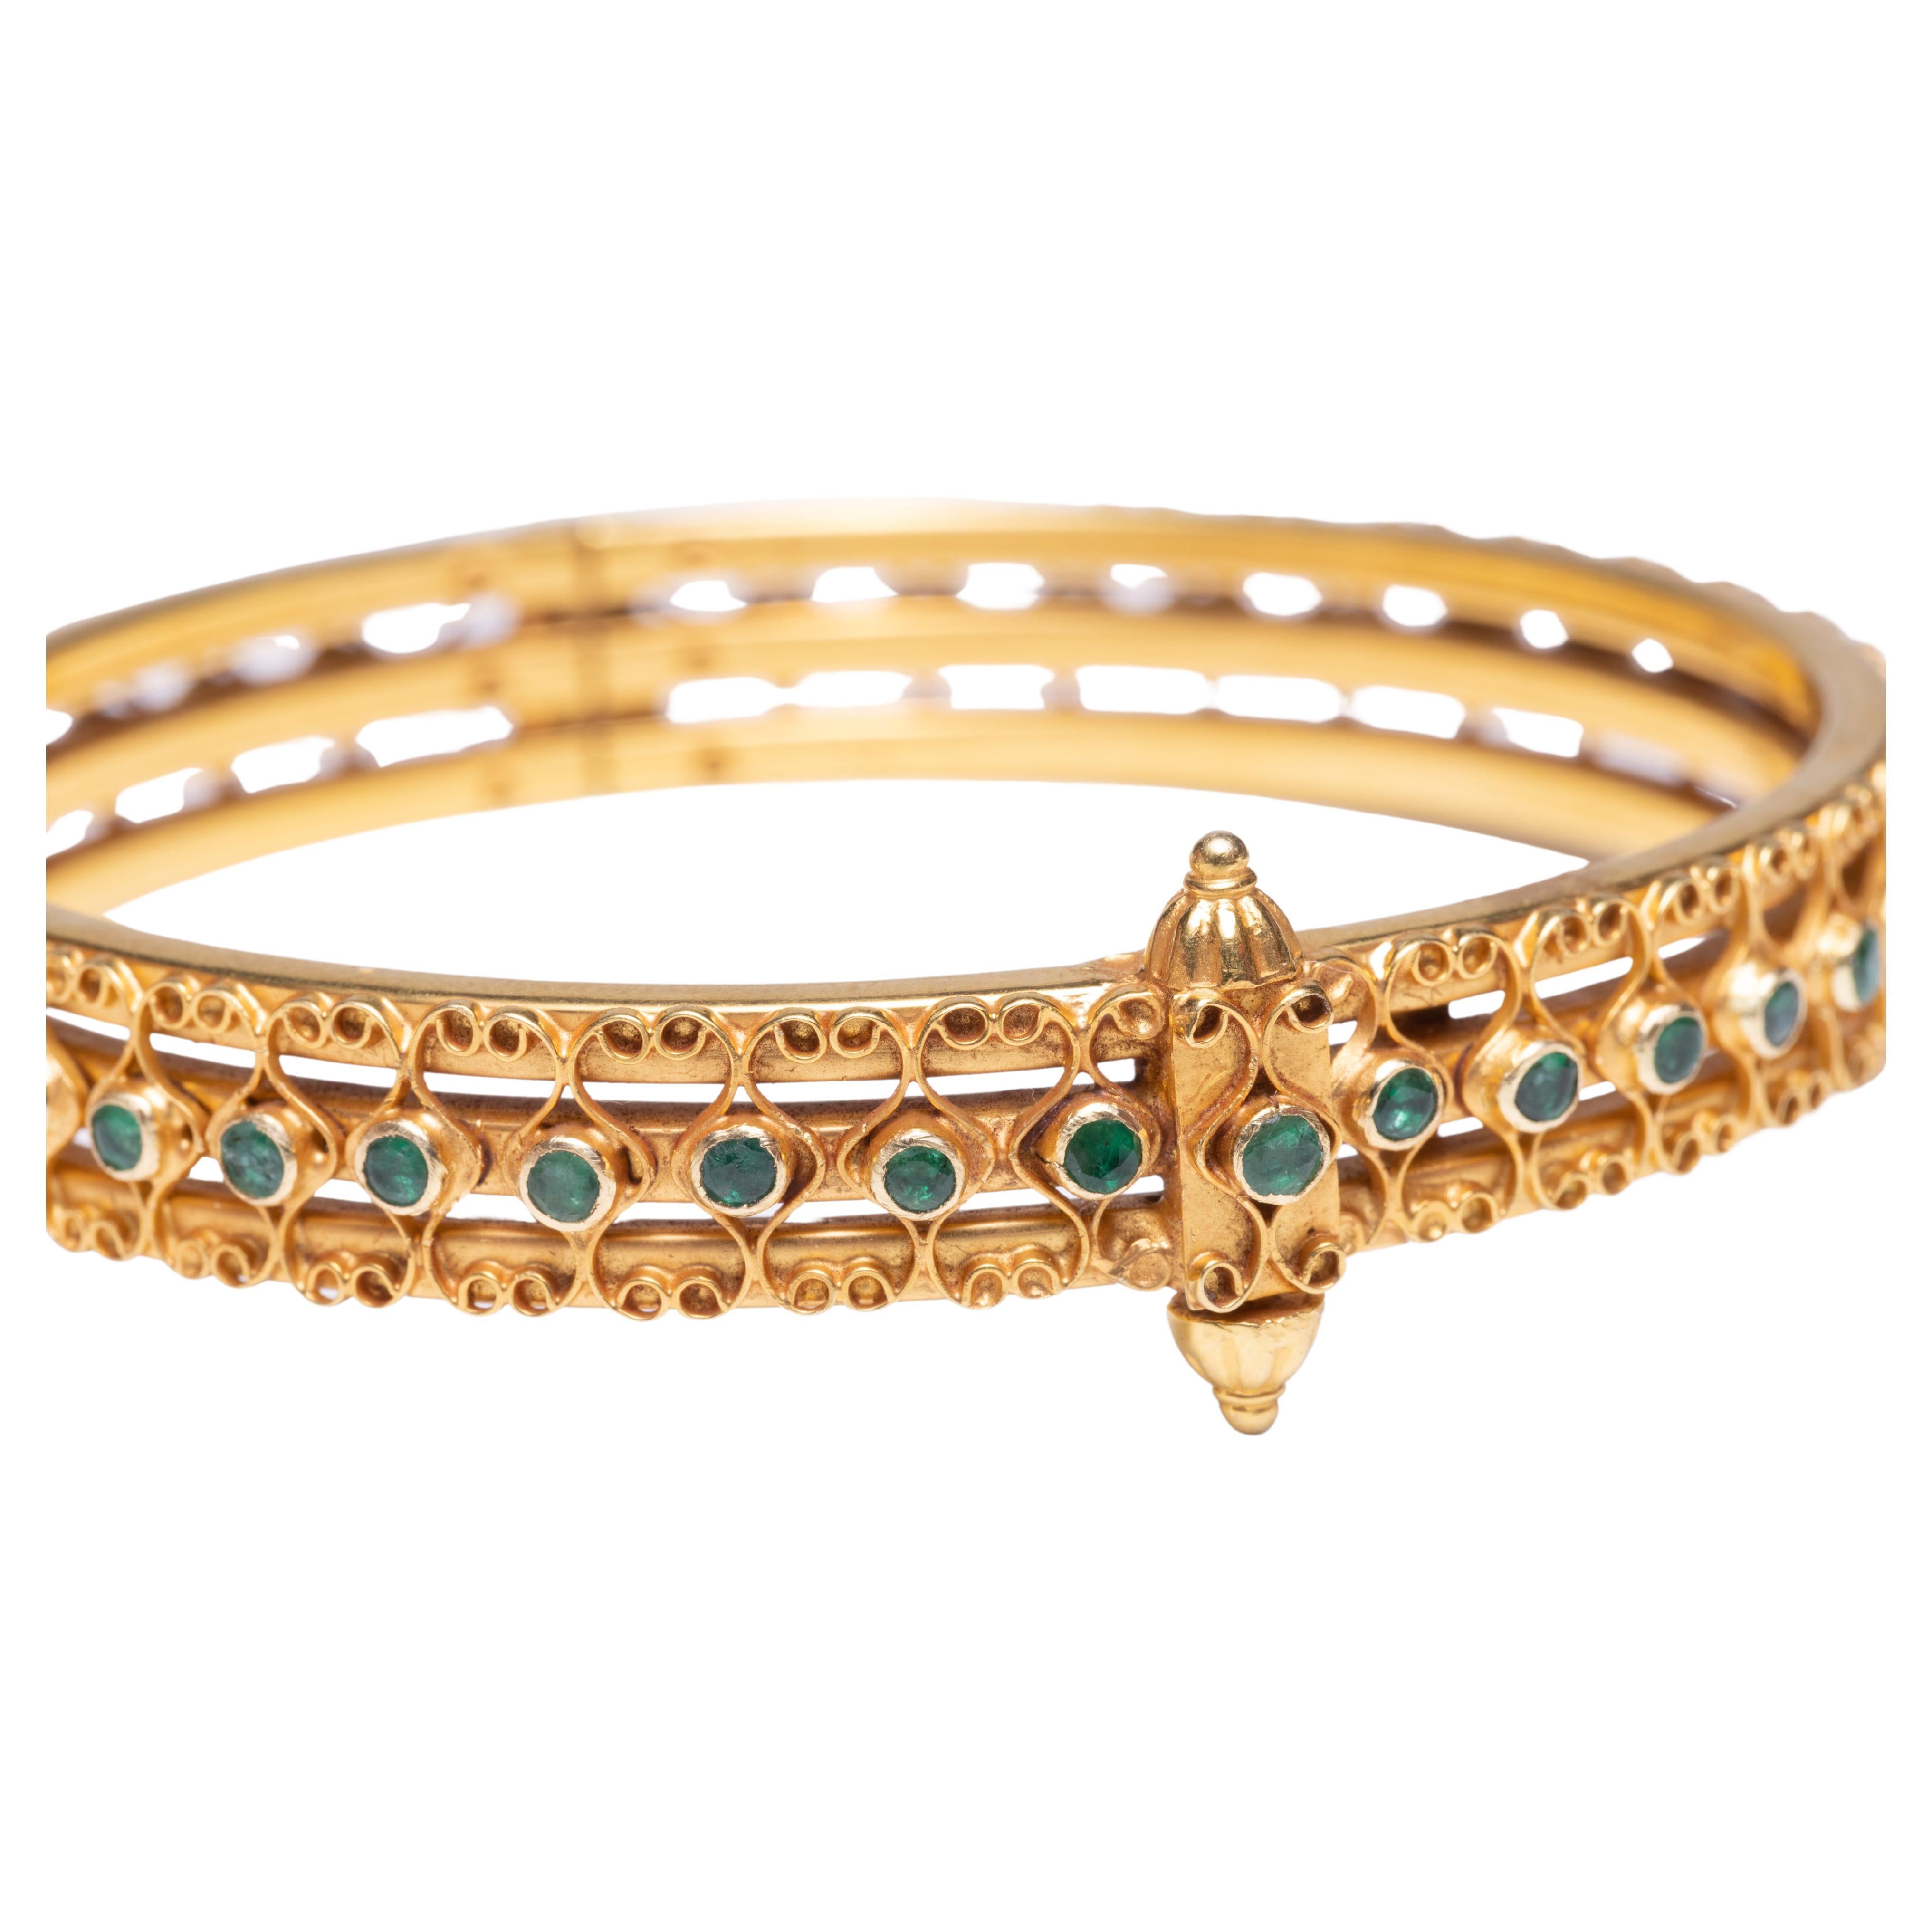 18K Gold bangle bracelet with faceted, round emeralds all around.  Intricate wire work by highly skilled and talented Indian goldsmiths.  Hinged for easy on and off.  Clasp is a screw at the top (that will not come out all the way keeping it safe